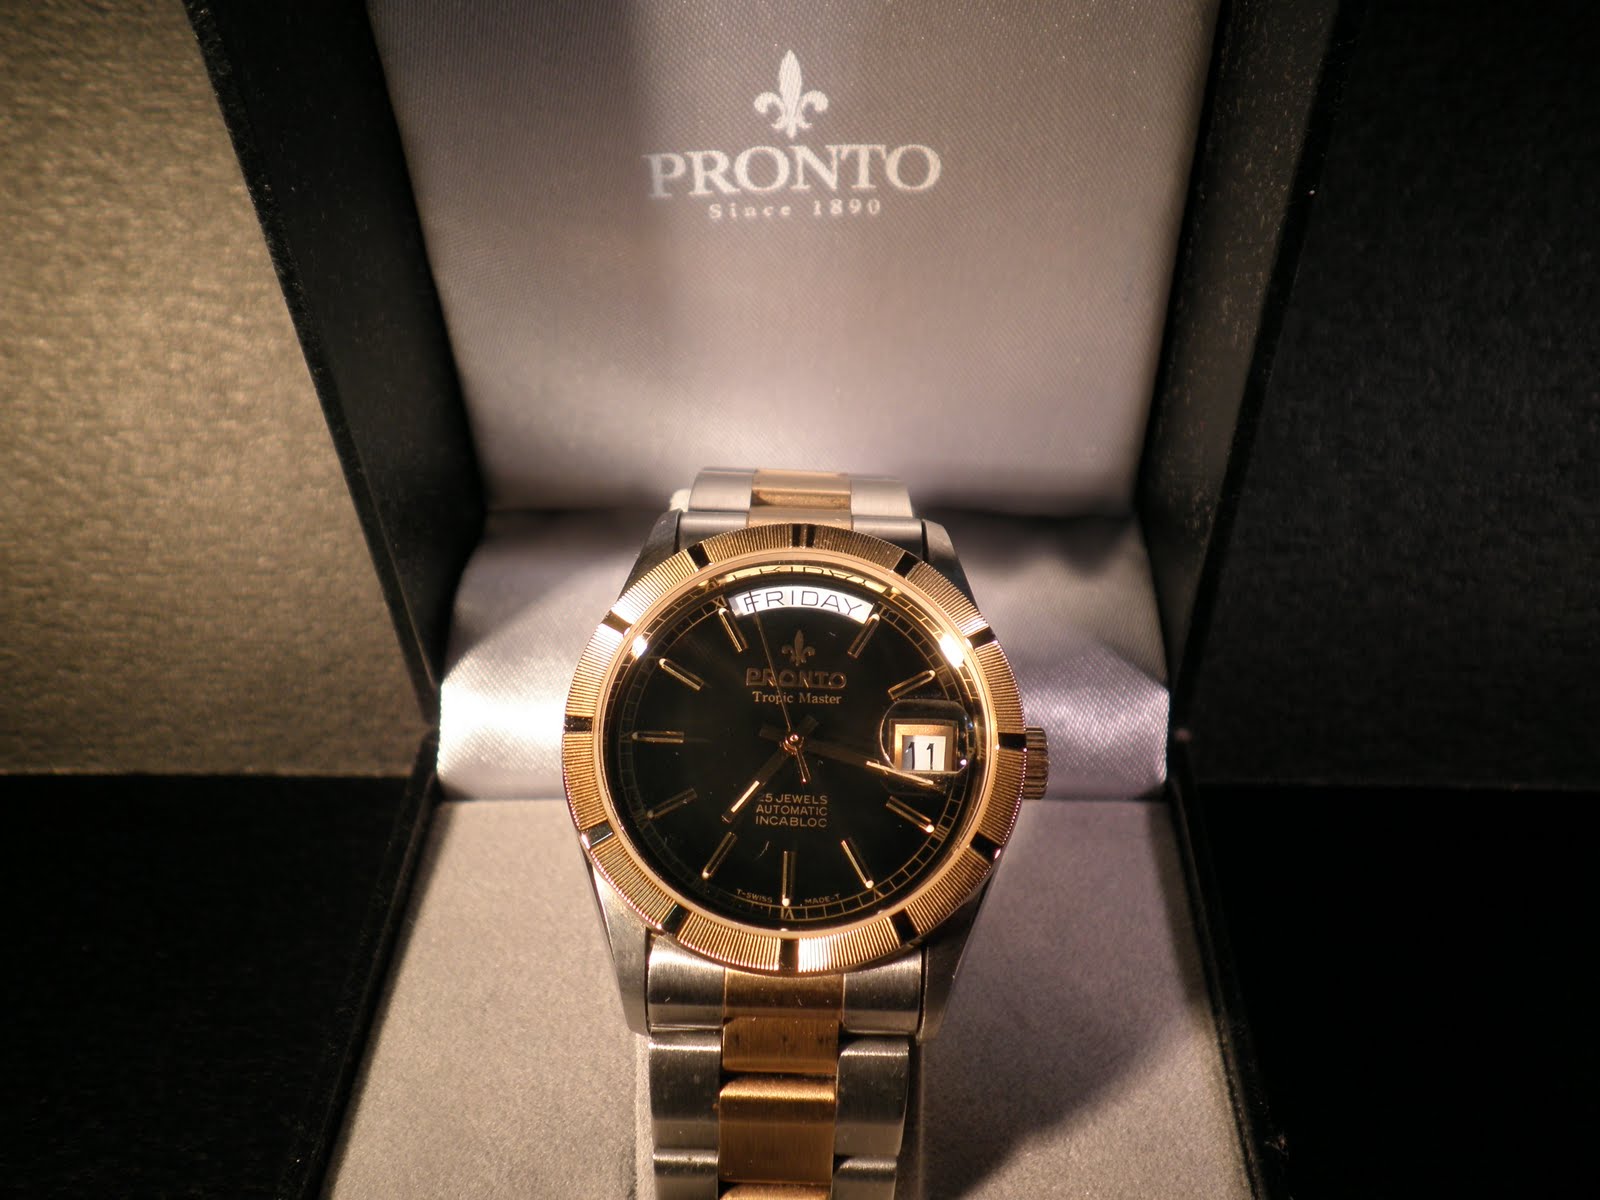 Pronto ~ Another Rolex look alike